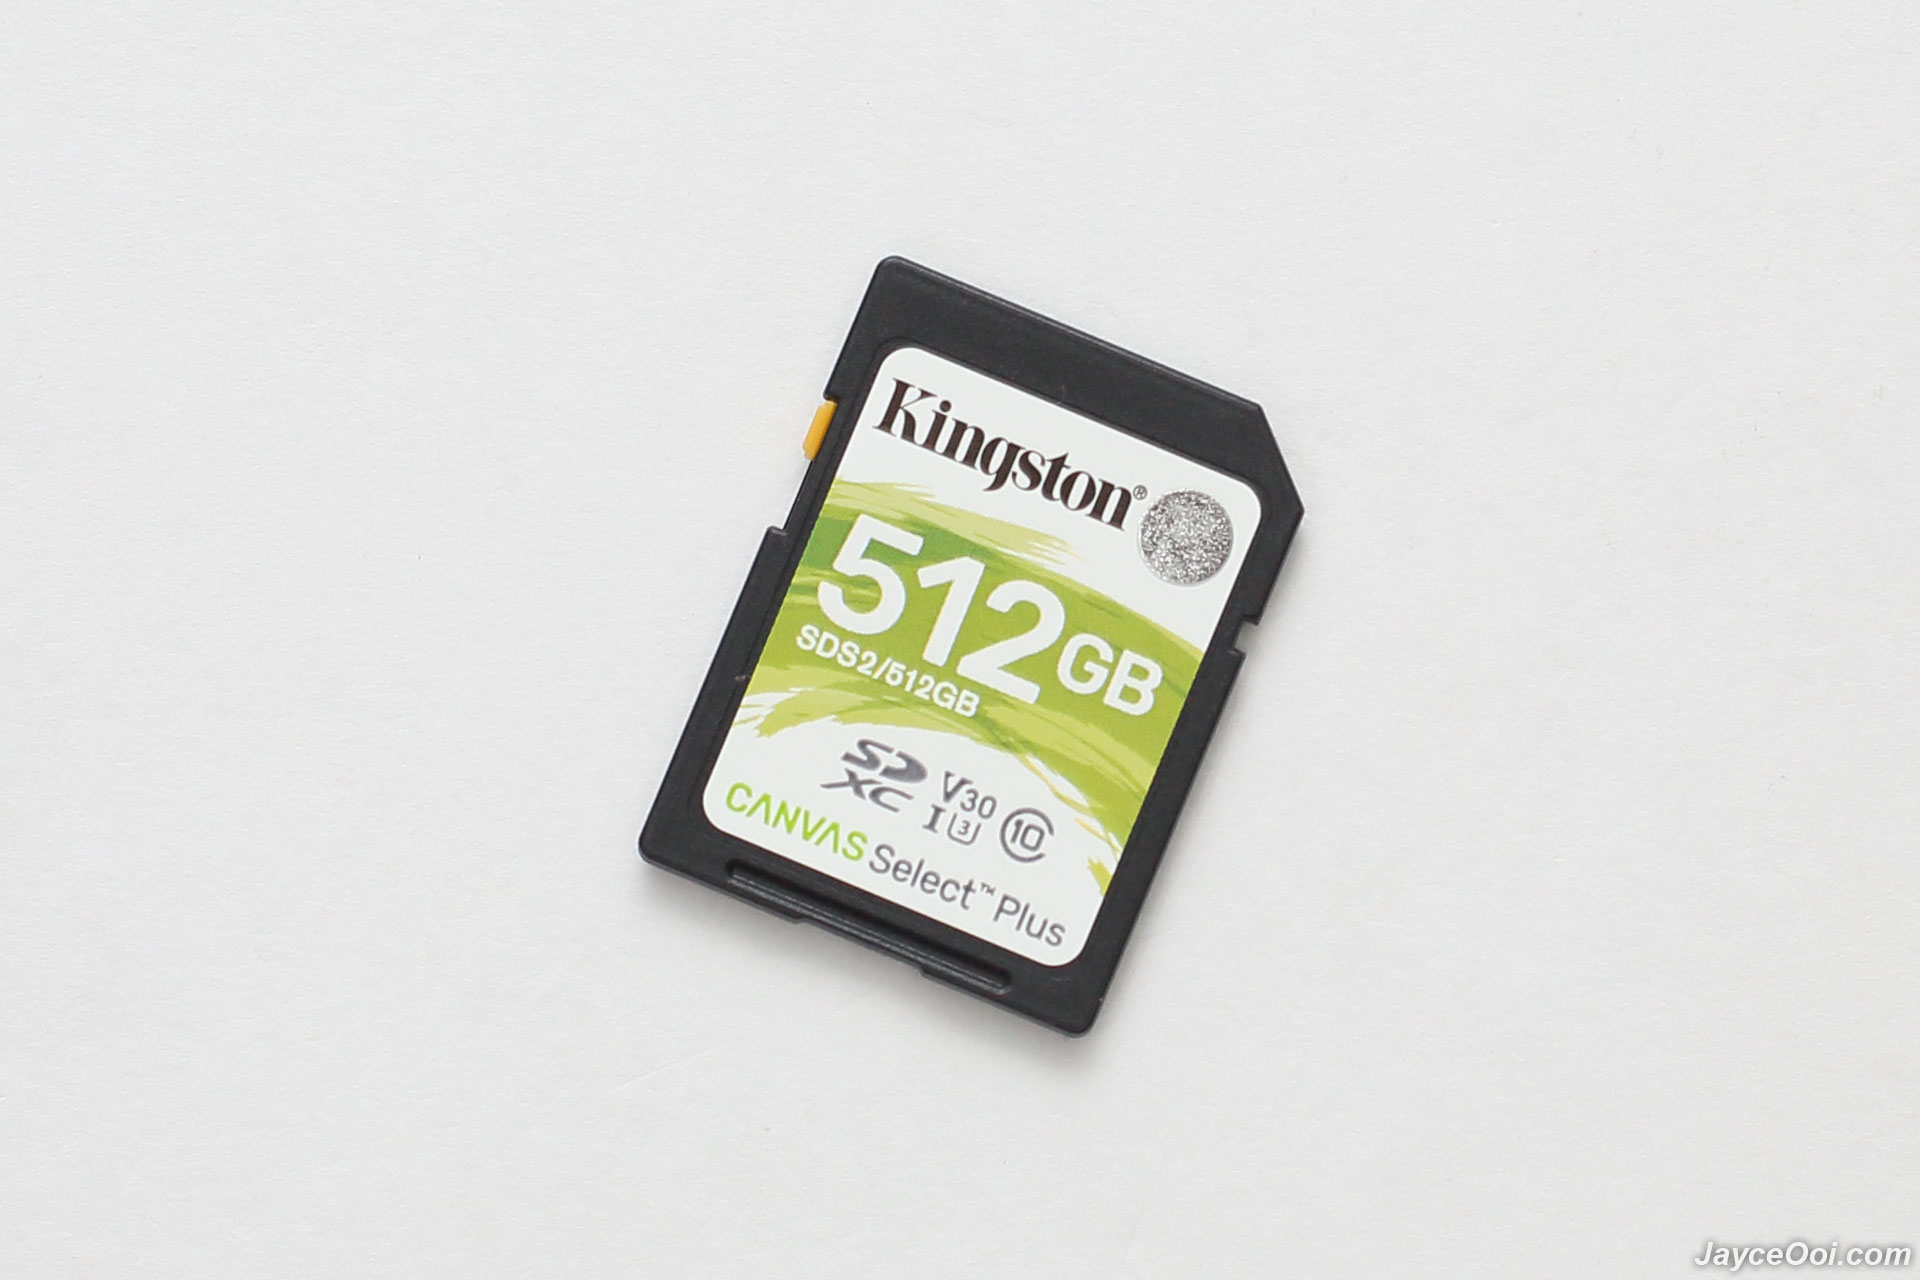 100MBs Works with Kingston Kingston 512GB ZTE V98 MicroSDXC Canvas Select Plus Card Verified by SanFlash.